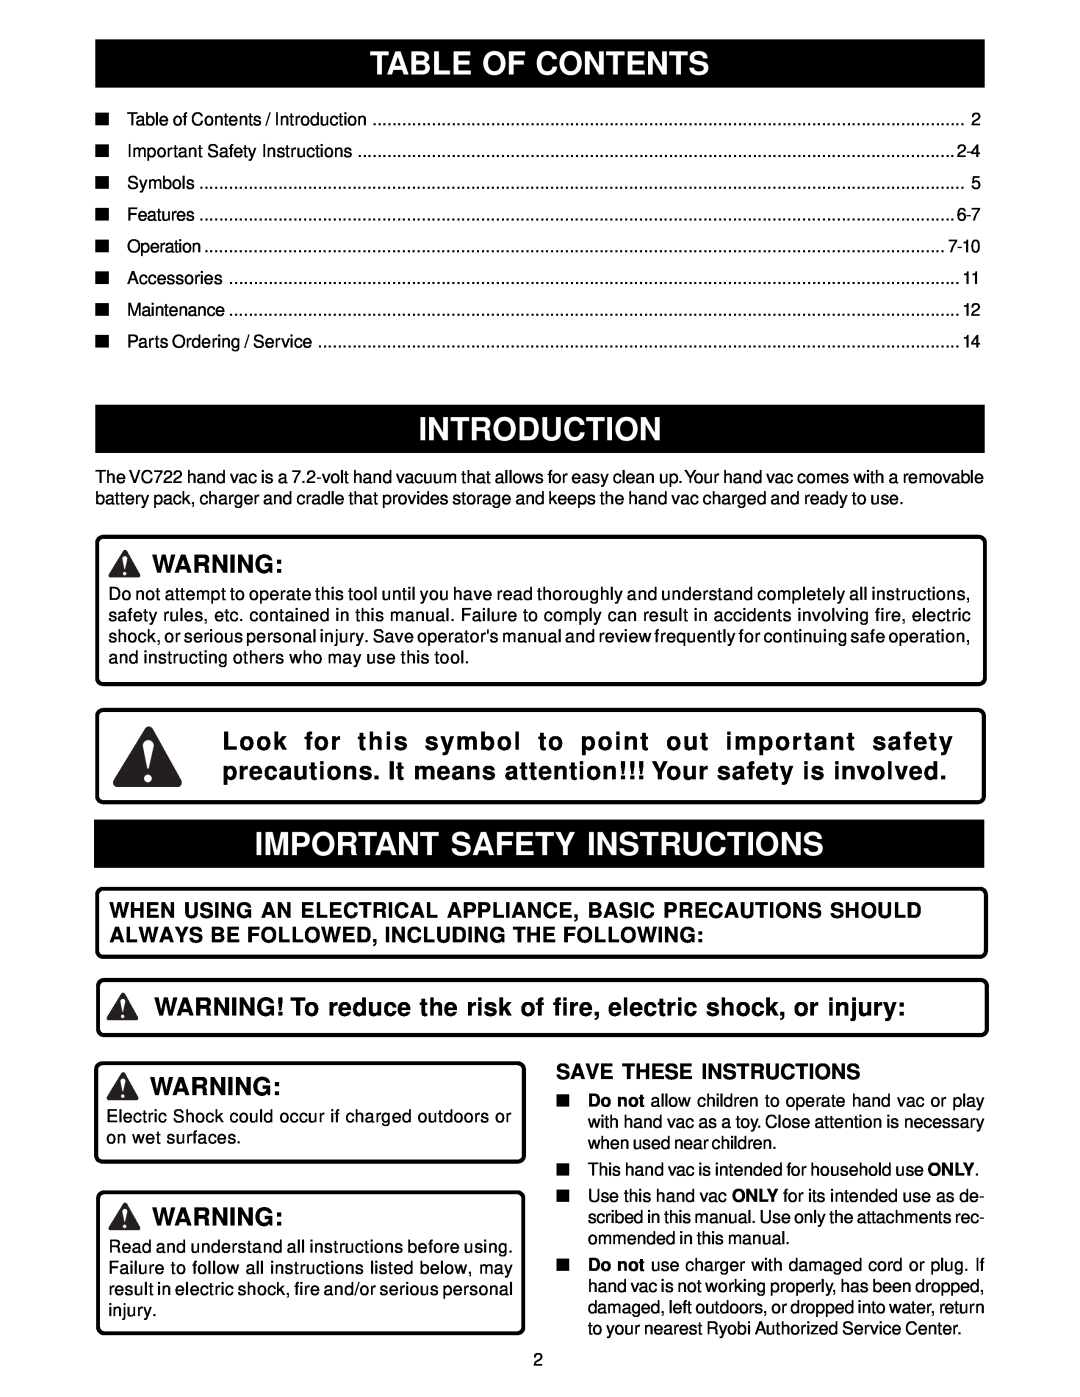 Ryobi VC722 manual Table Of Contents, Introduction, Important Safety Instructions, Save These Instructions 